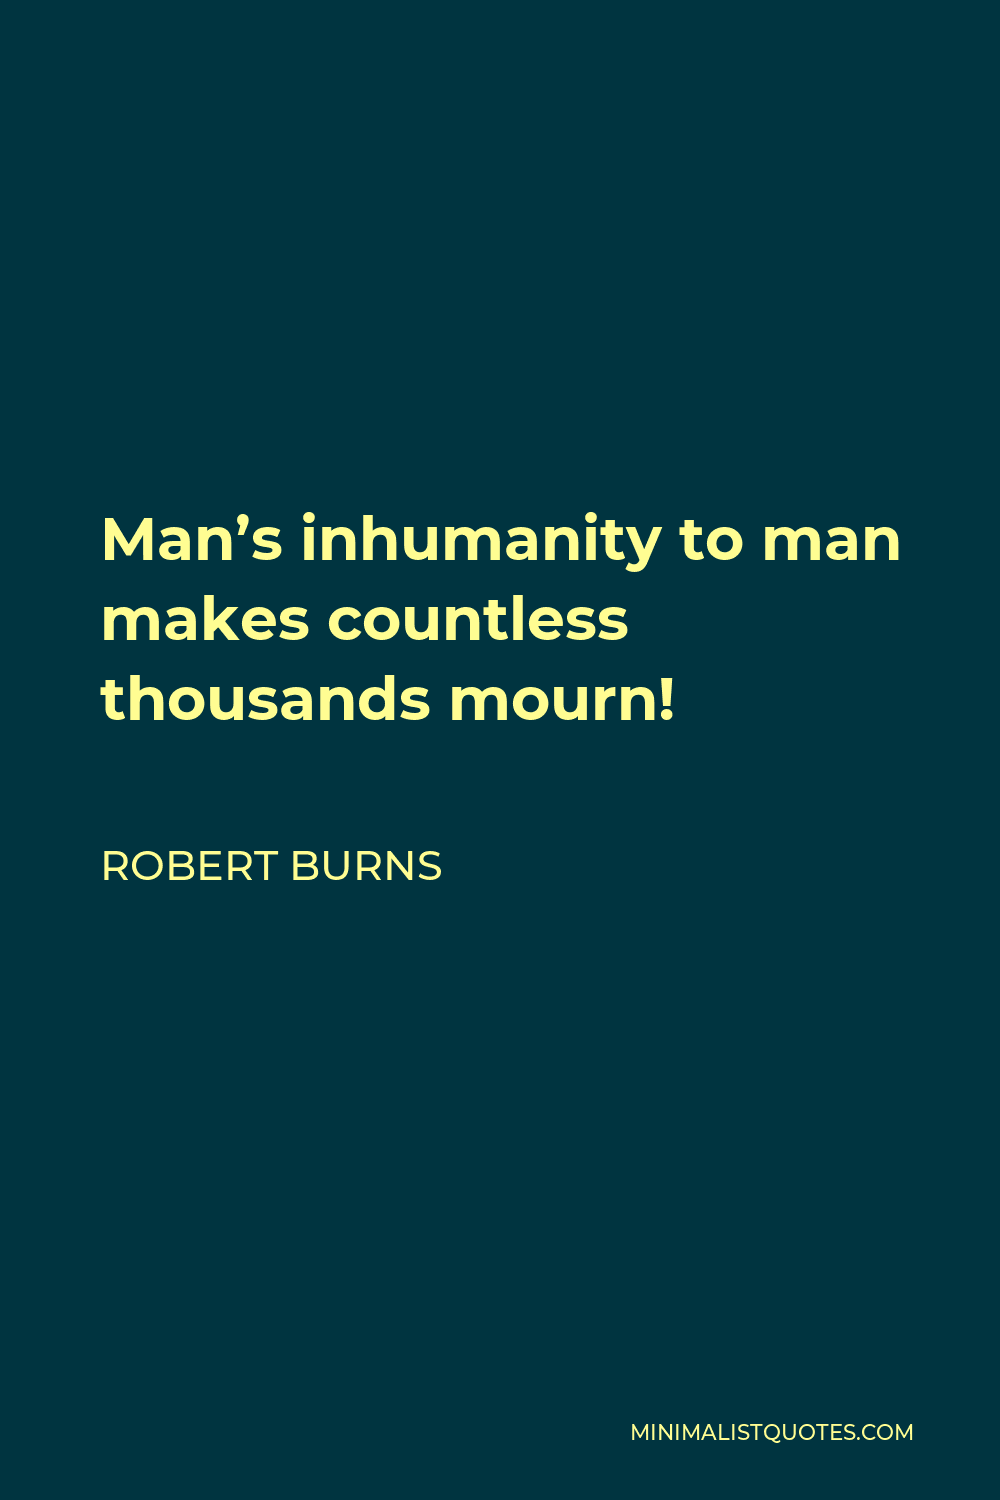 Robert Burns Quote - Man’s inhumanity to man makes countless thousands mourn!